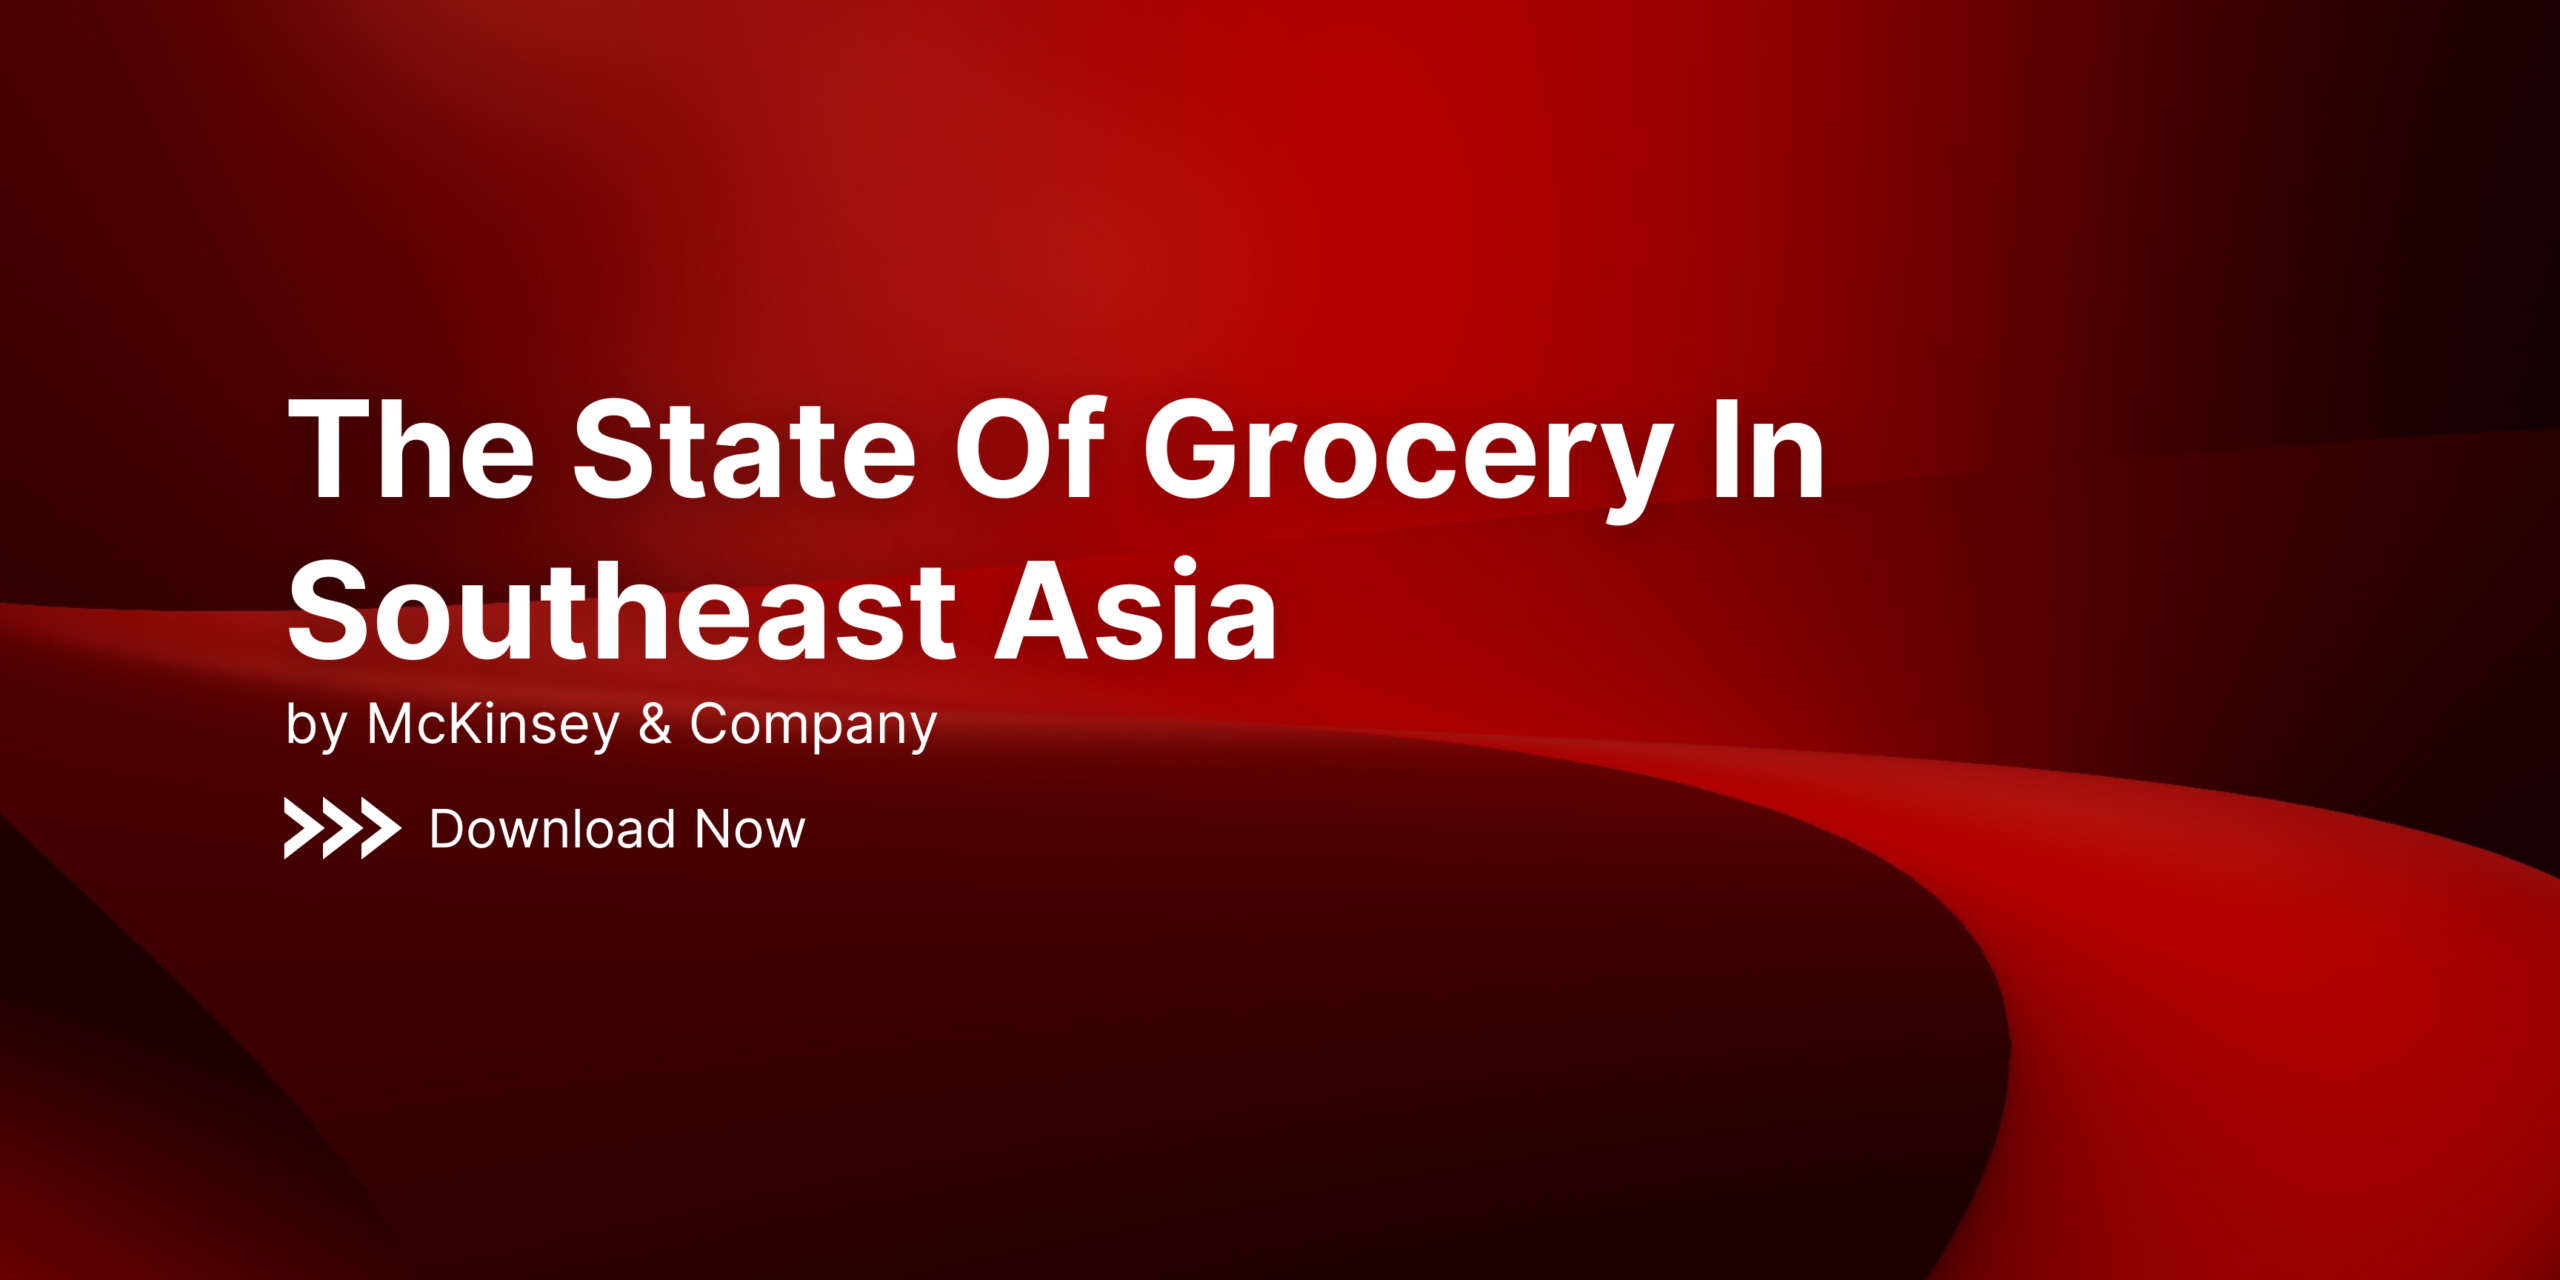 The State Of Grocery In Southeast Asia